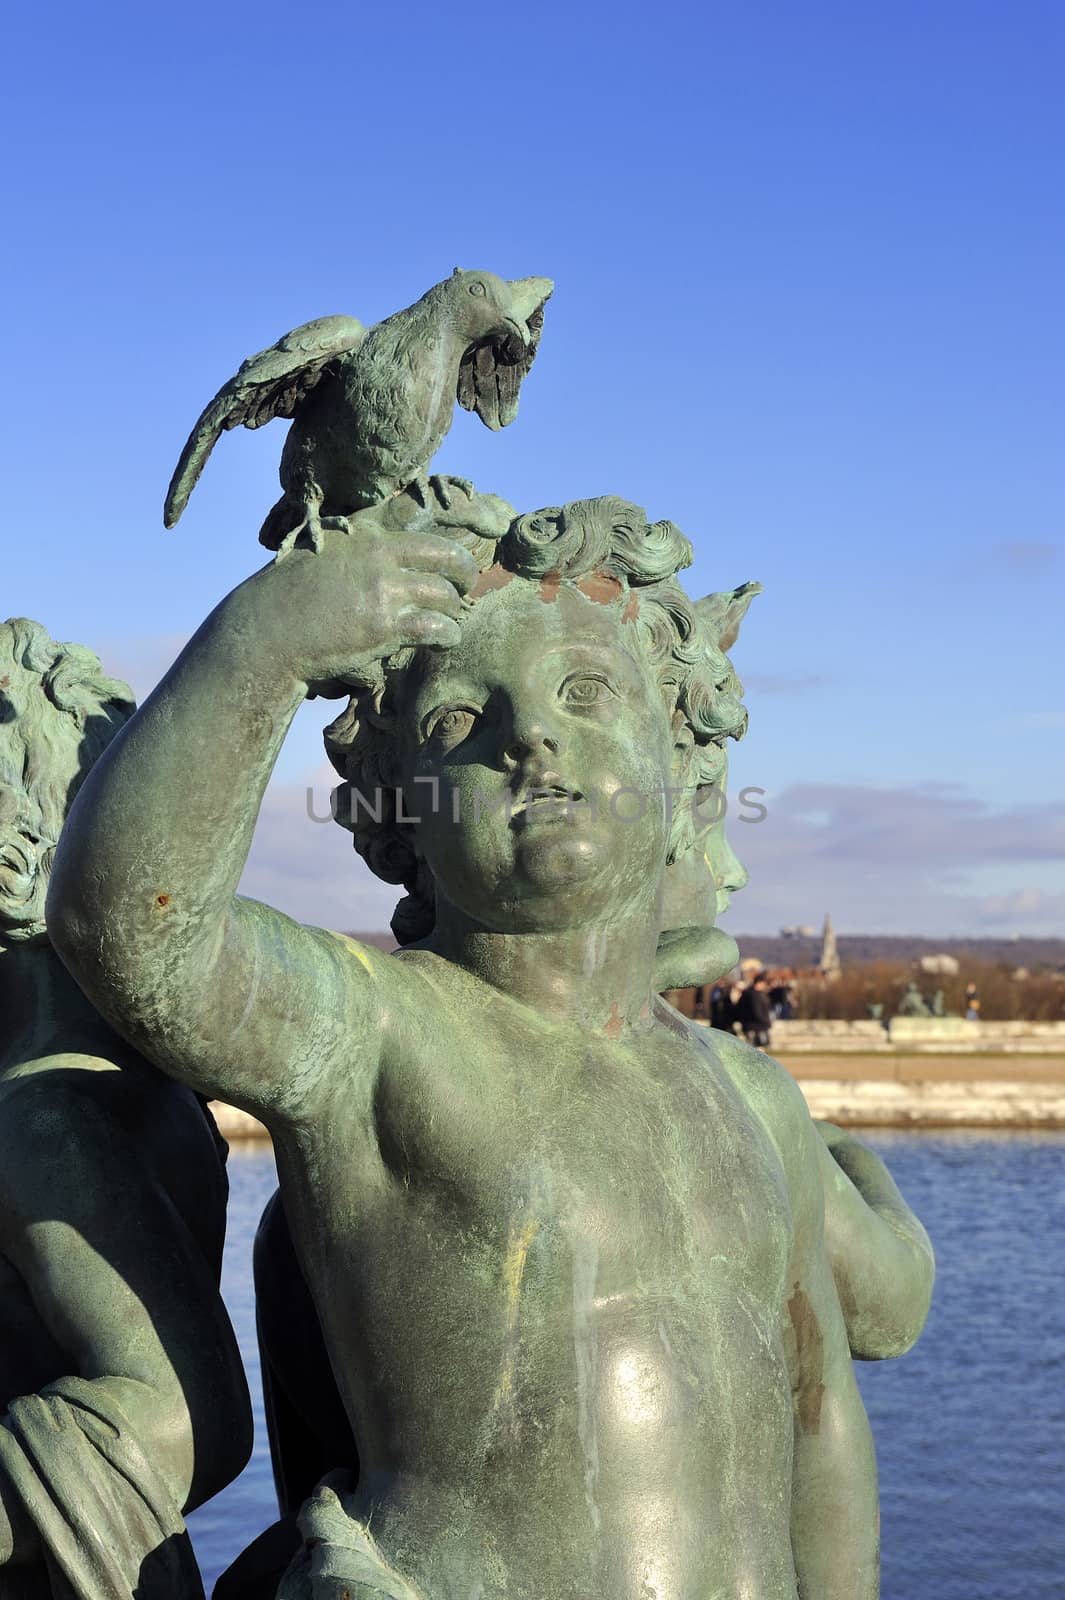 Park of the castle of Versailles sculpture reflecting pool